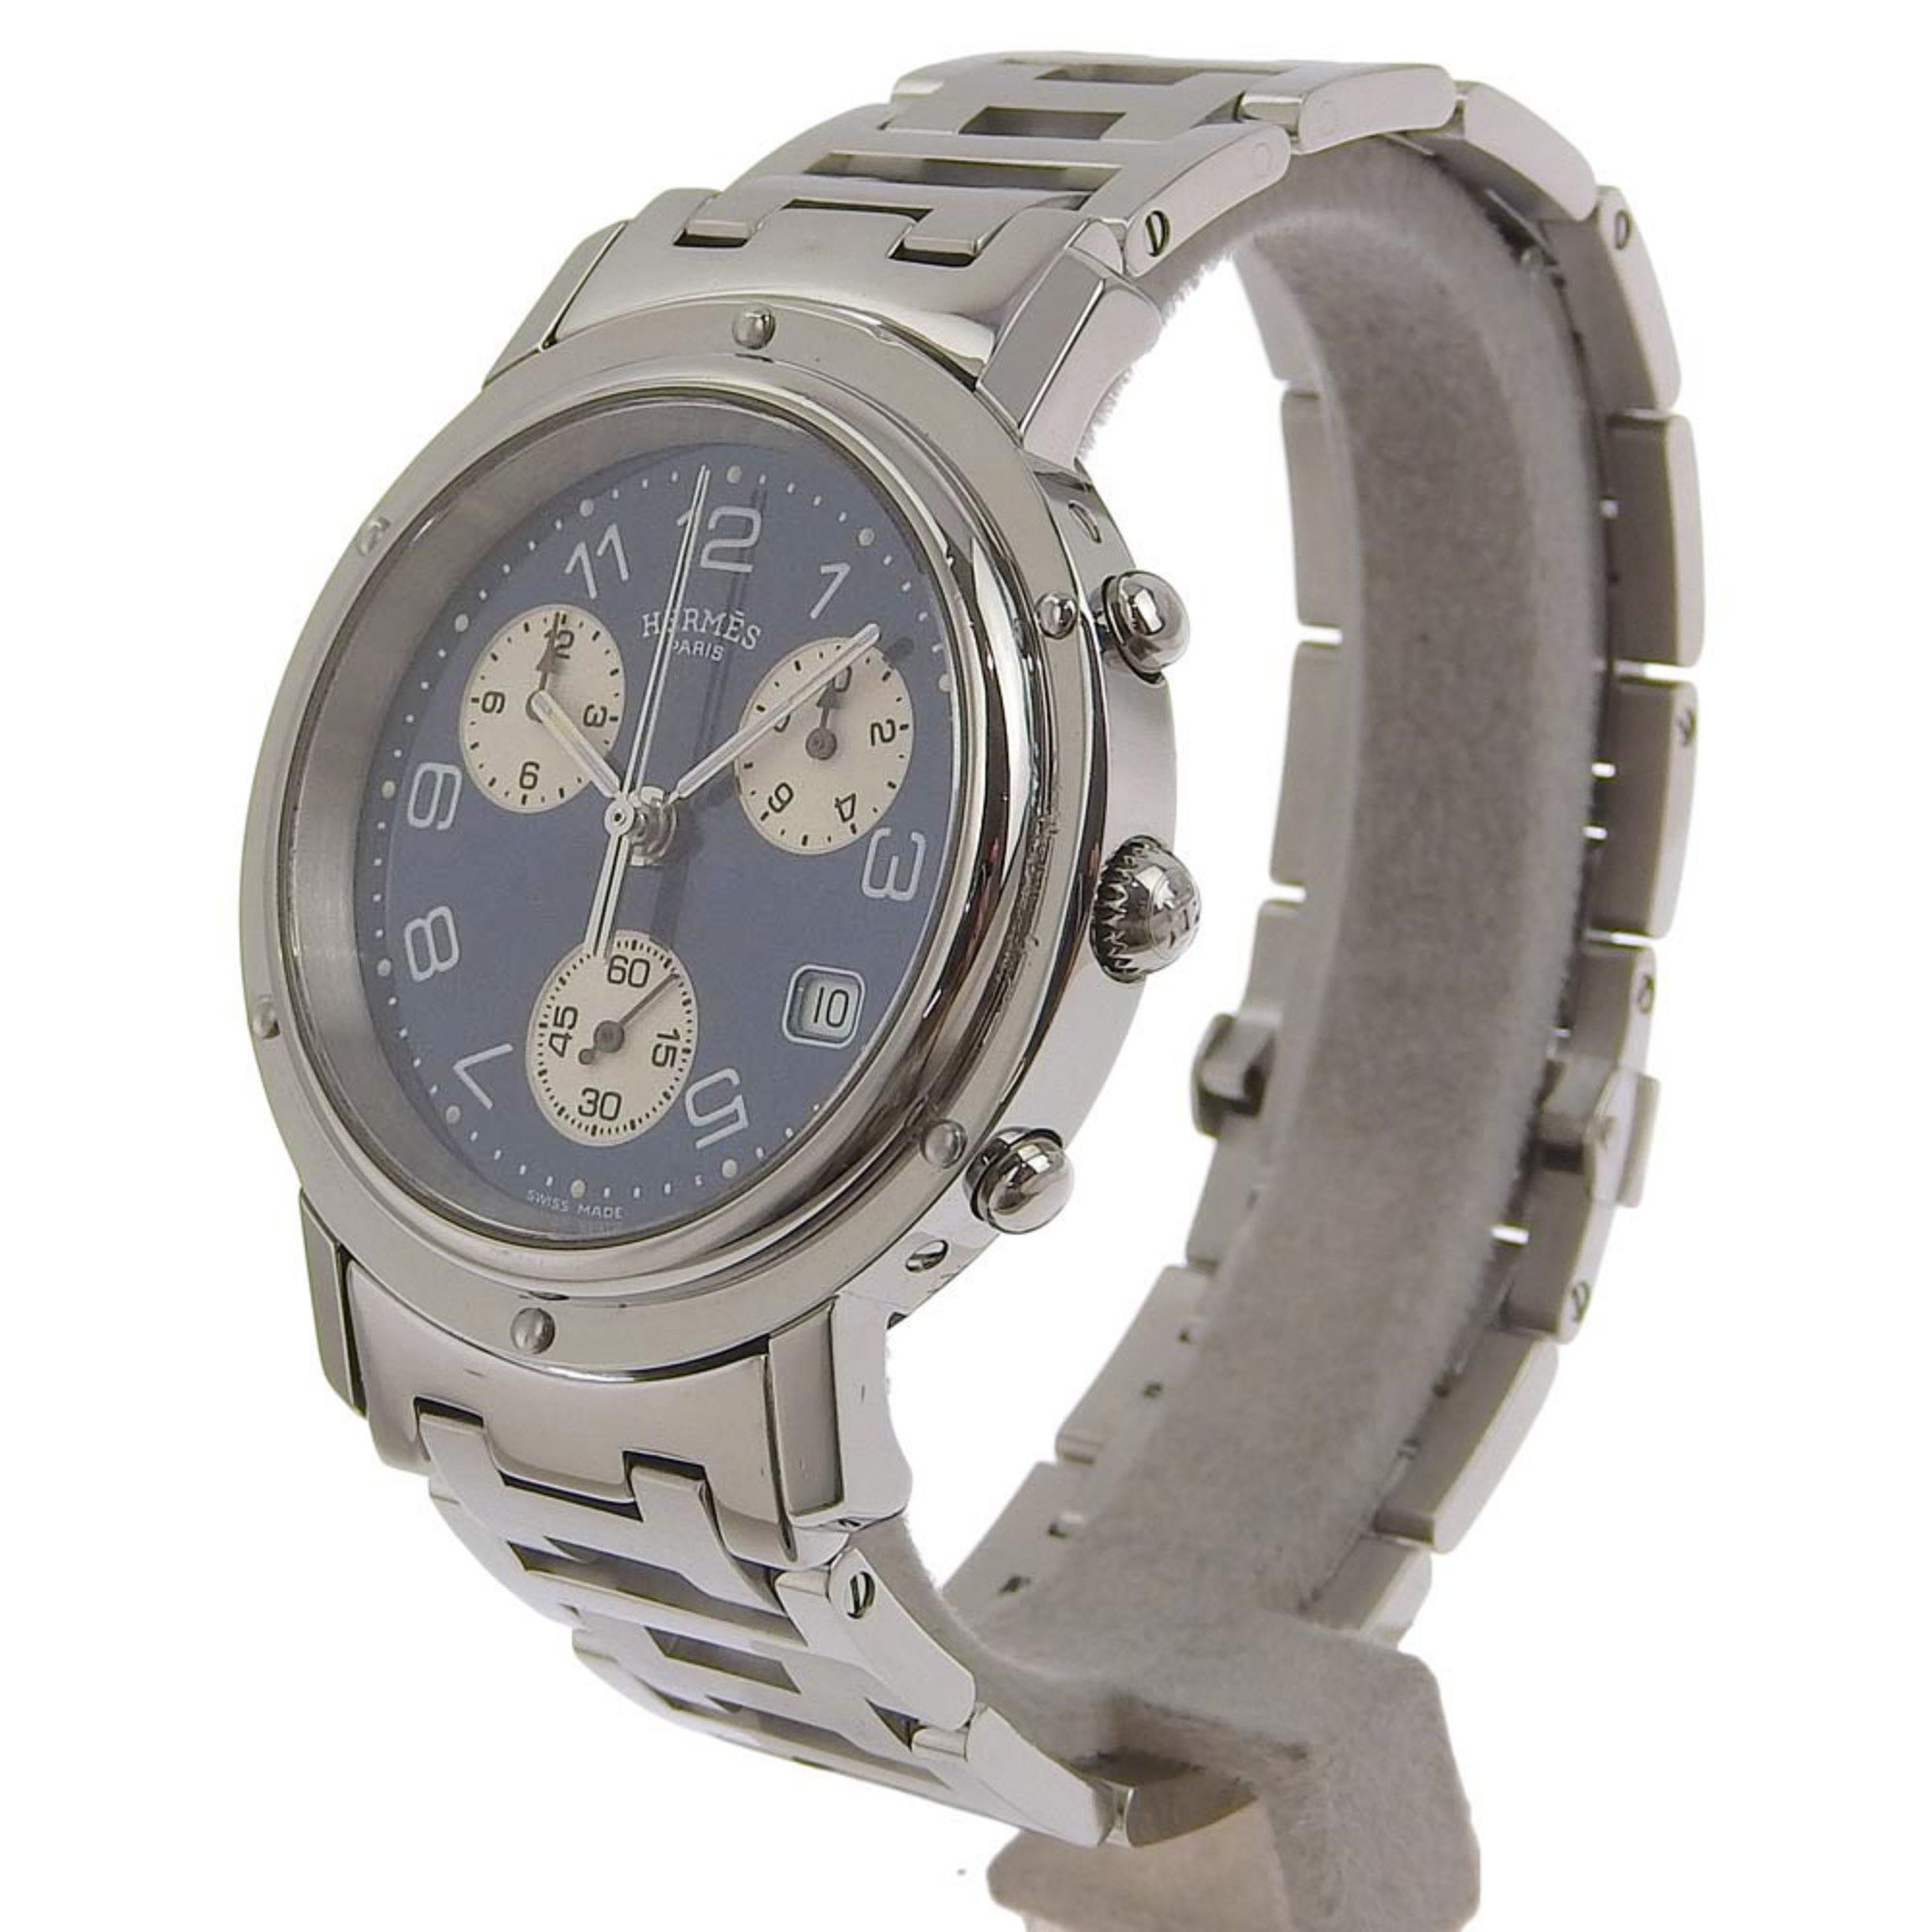 Hermes Clipper Watch CL1.910 Stainless Steel Swiss Made Silver Quartz Chronograph Navy Dial Men's